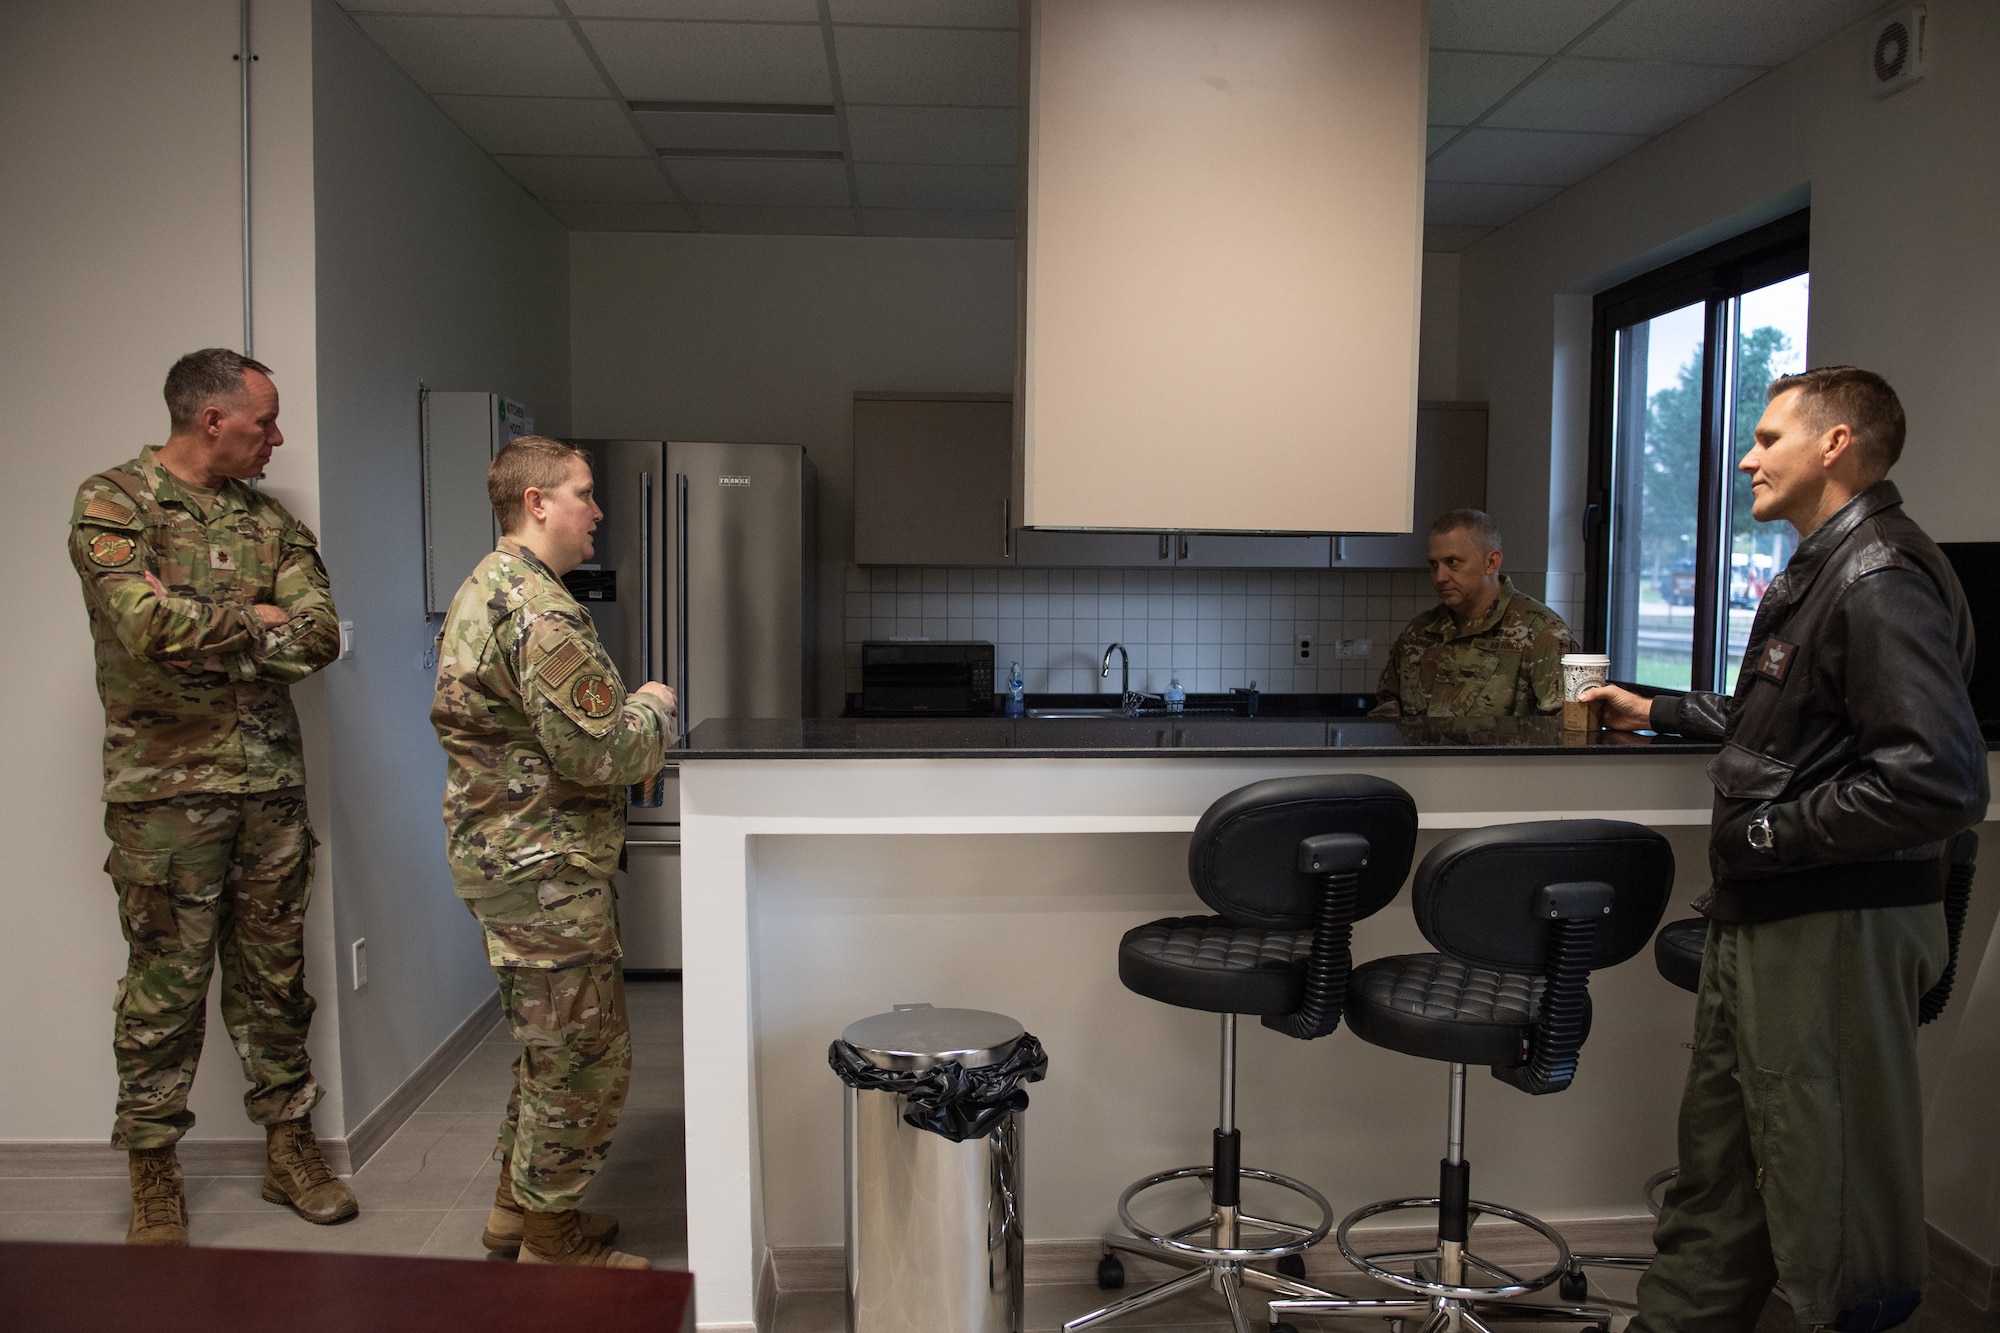 U.S. Air Force Capt. Cheven Bonnell, 39th Medical Group Operational Support Team element lead, briefs two Airmen inside the kitchen area about the new OST building capabilities.